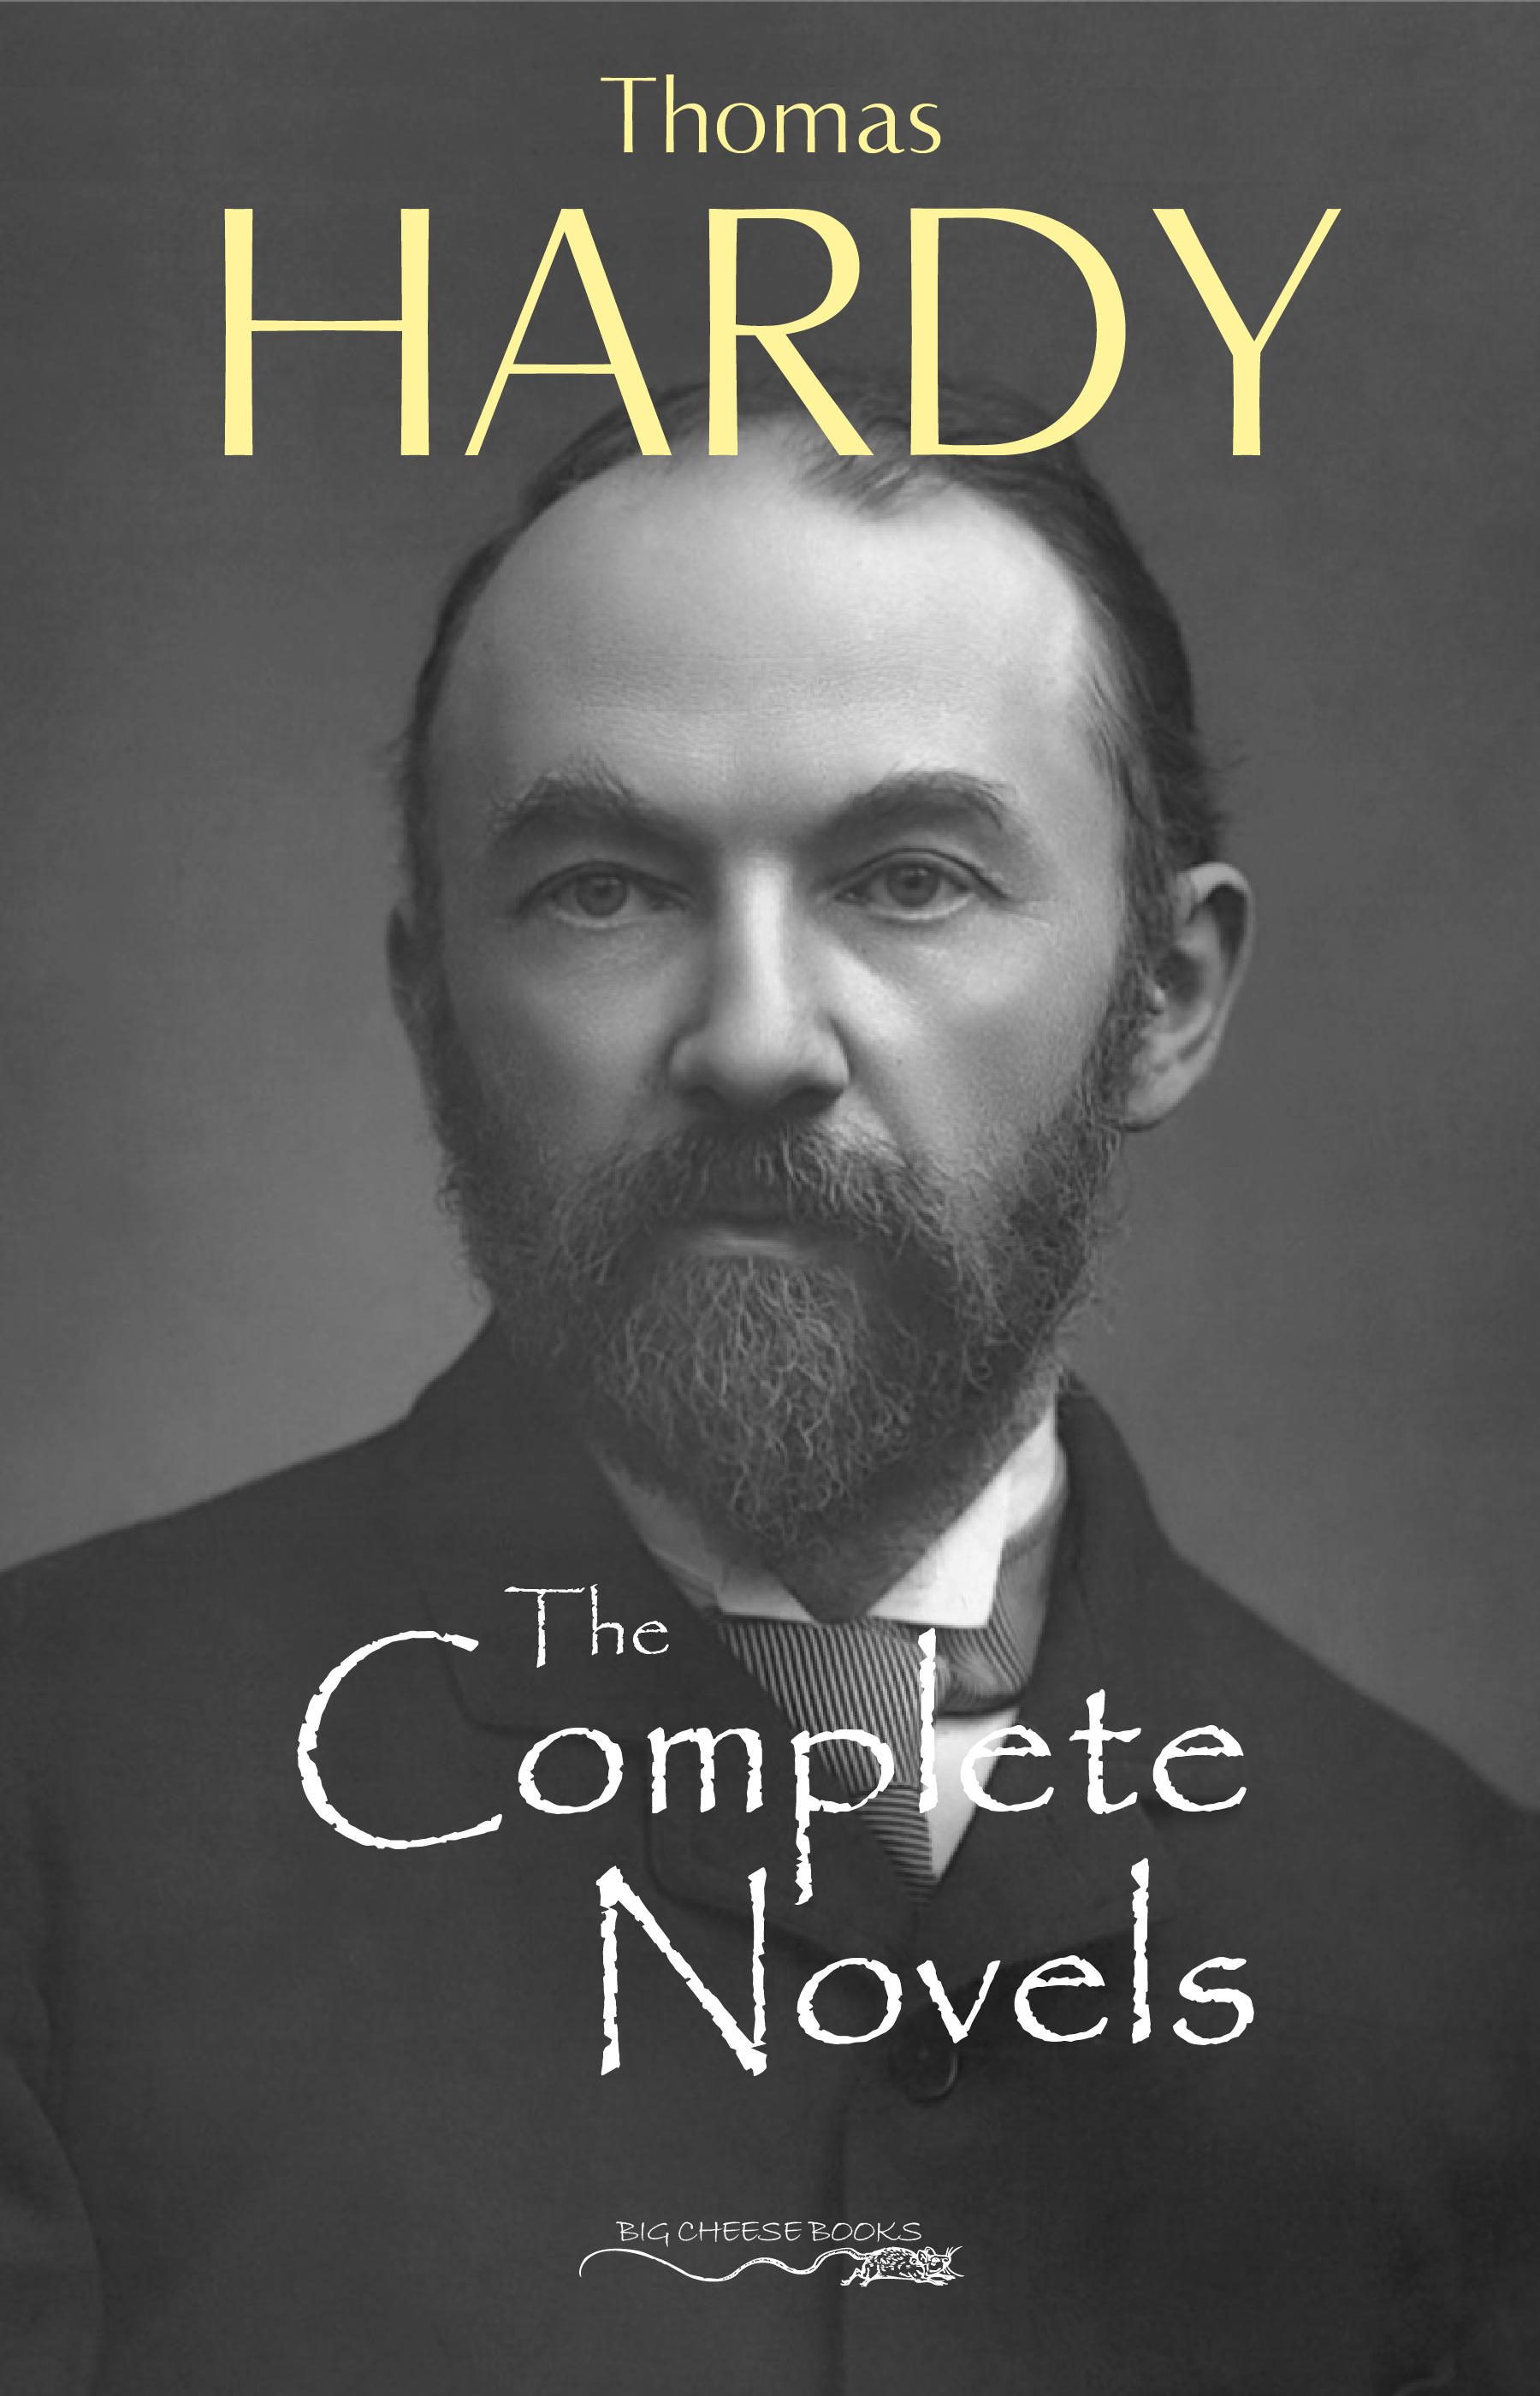 Thomas Hardy: The Complete Novels - Far From The Madding Crowd, The Return of the Native, The Mayor of Casterbridge, Tess of the d'Urbervilles, Jude the Obscure and much more..